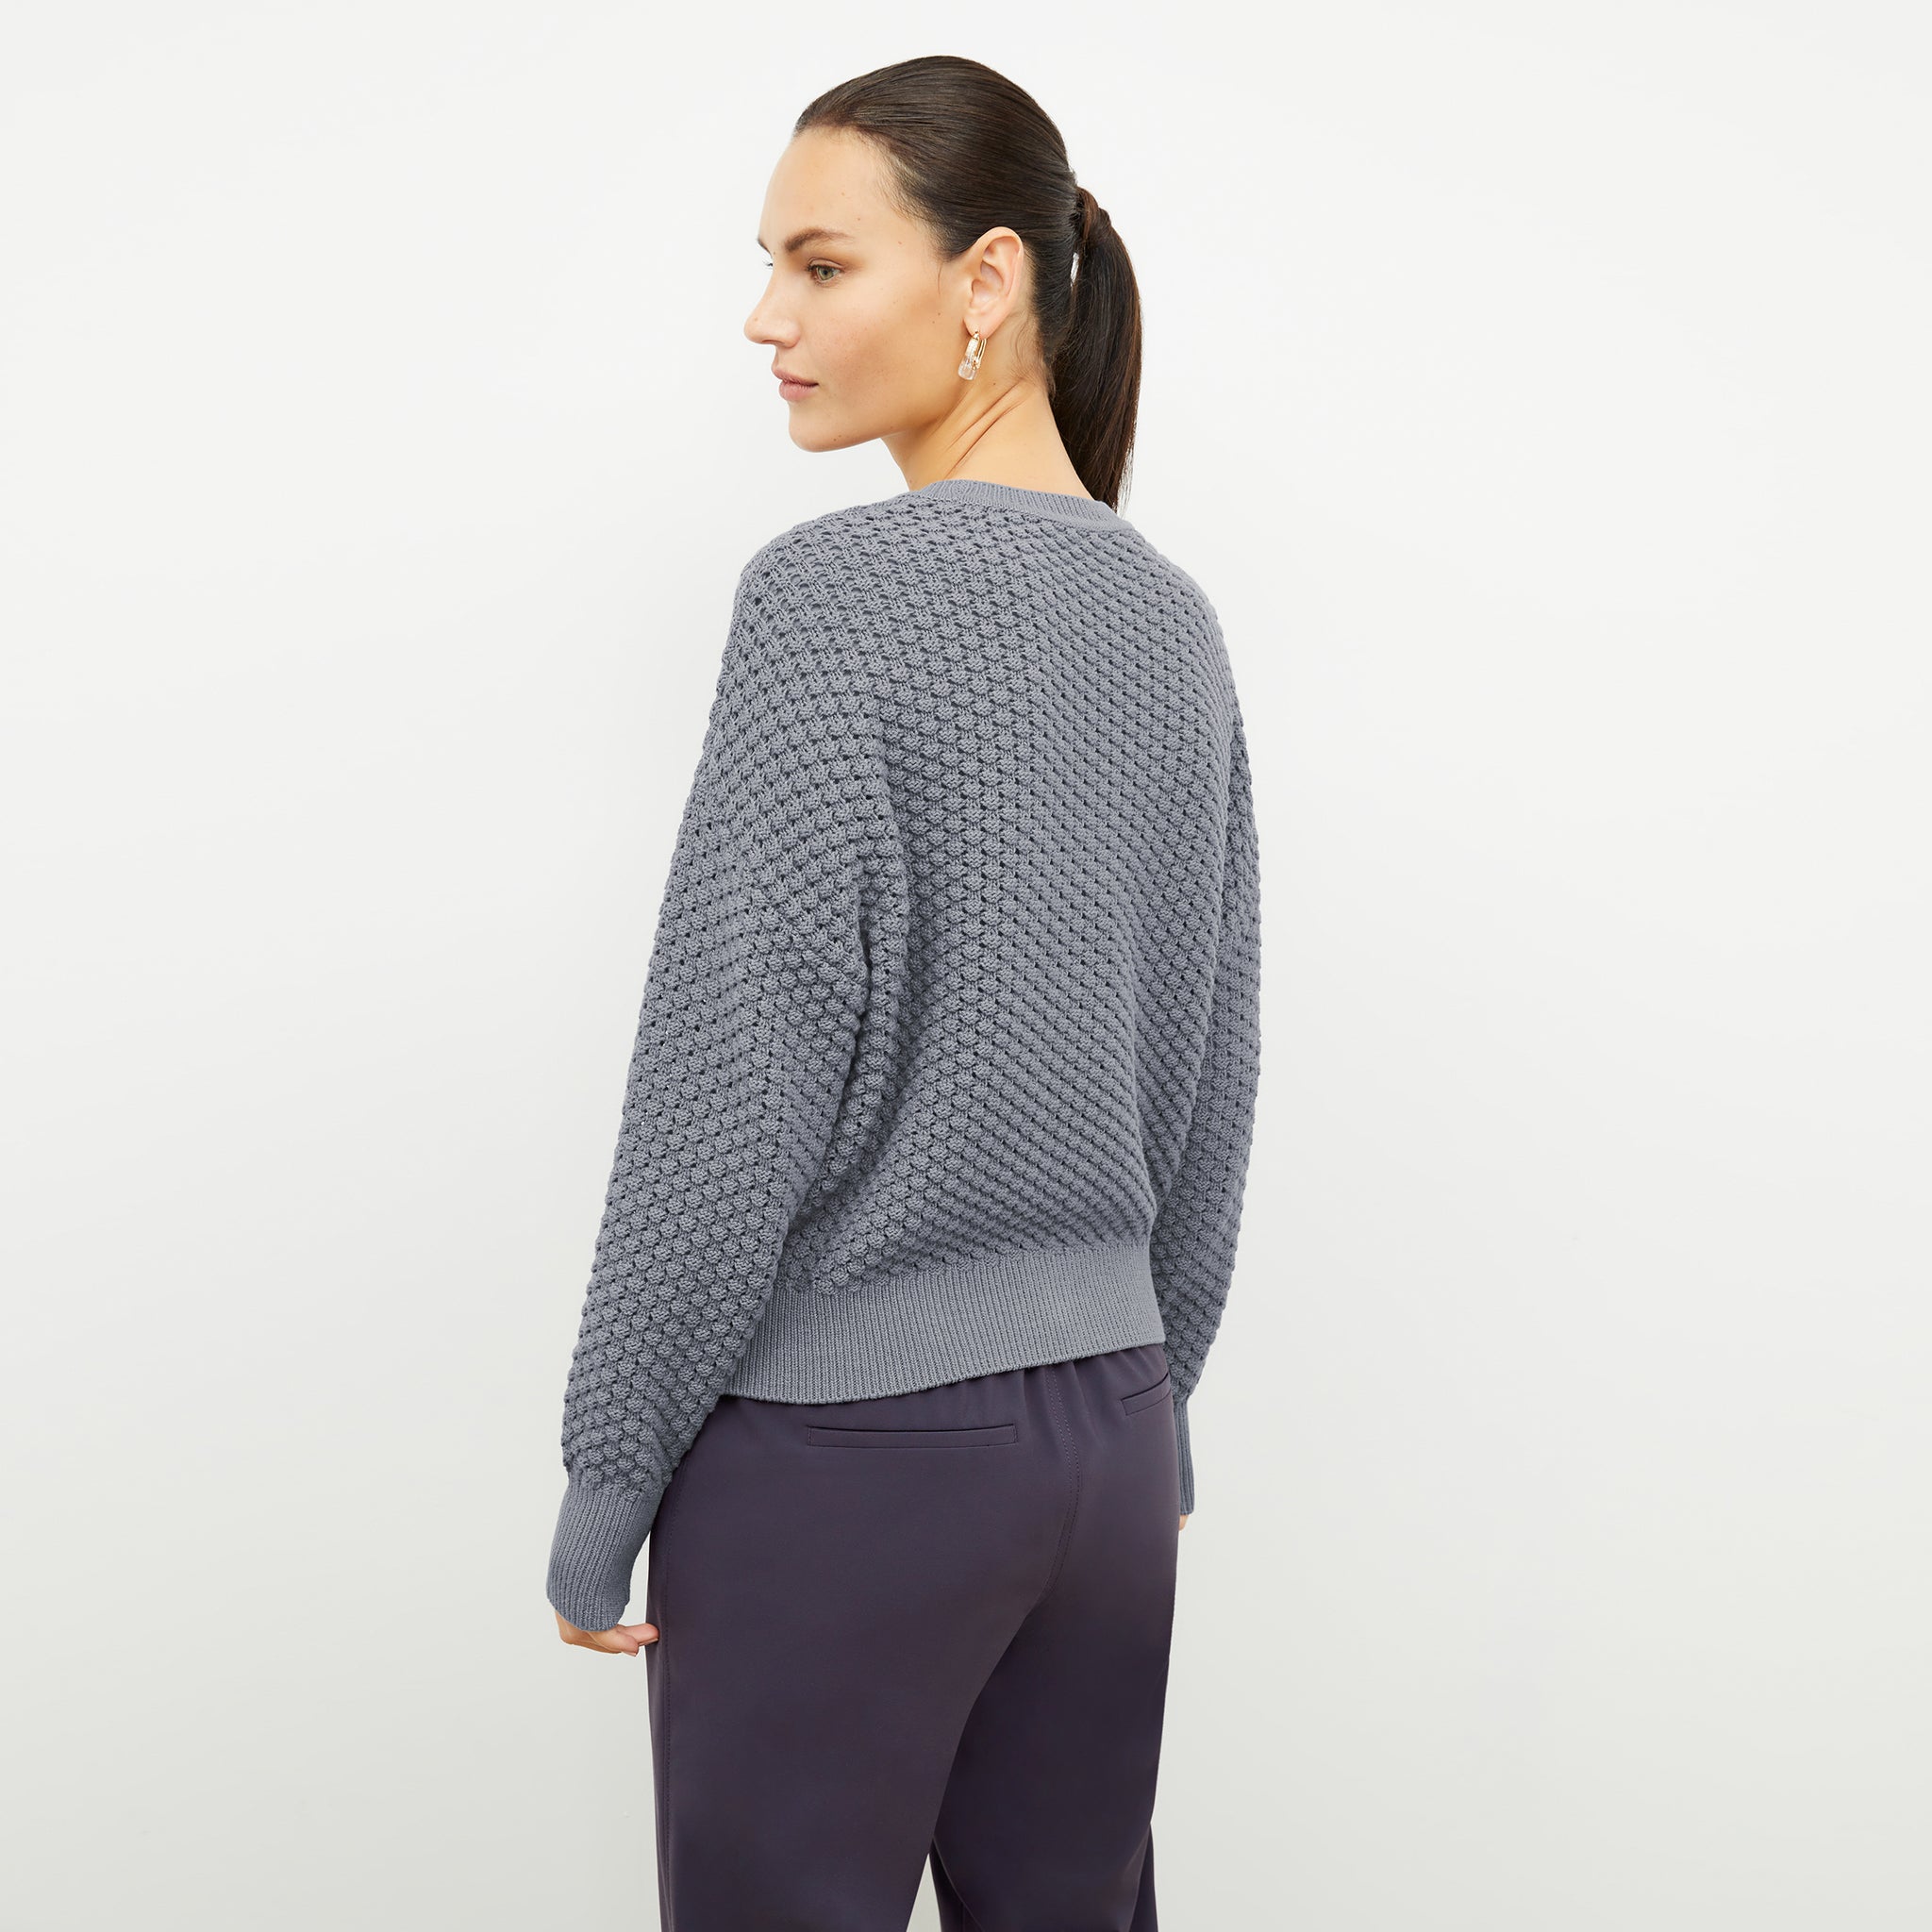 back image of a woman wearing the liam sweater in flint gray